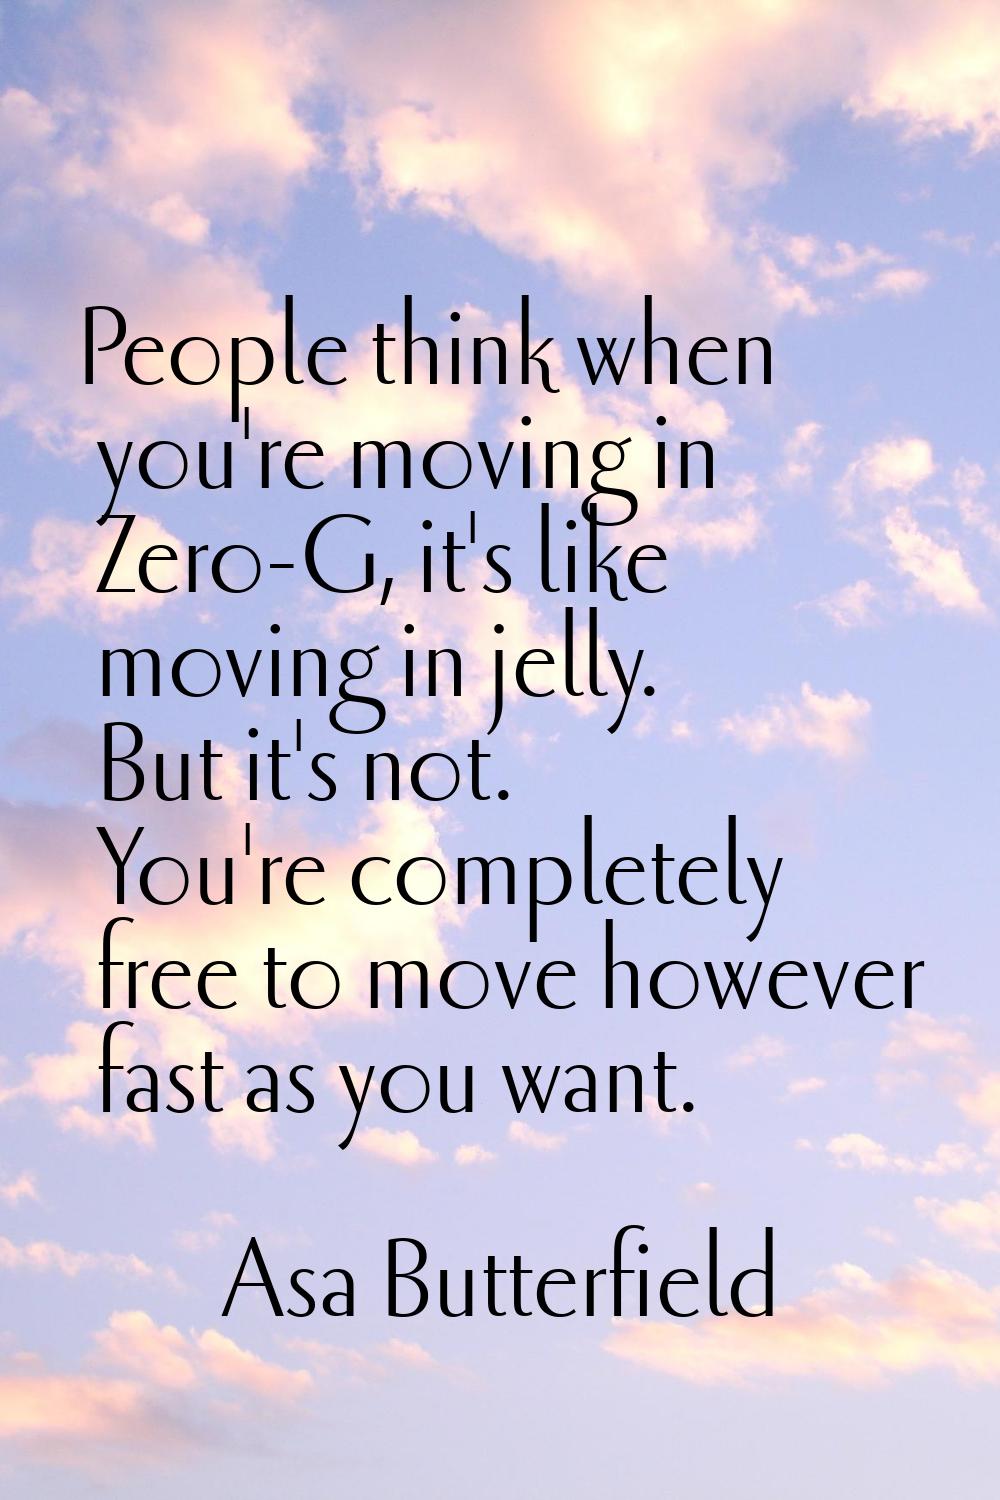 People think when you're moving in Zero-G, it's like moving in jelly. But it's not. You're complete